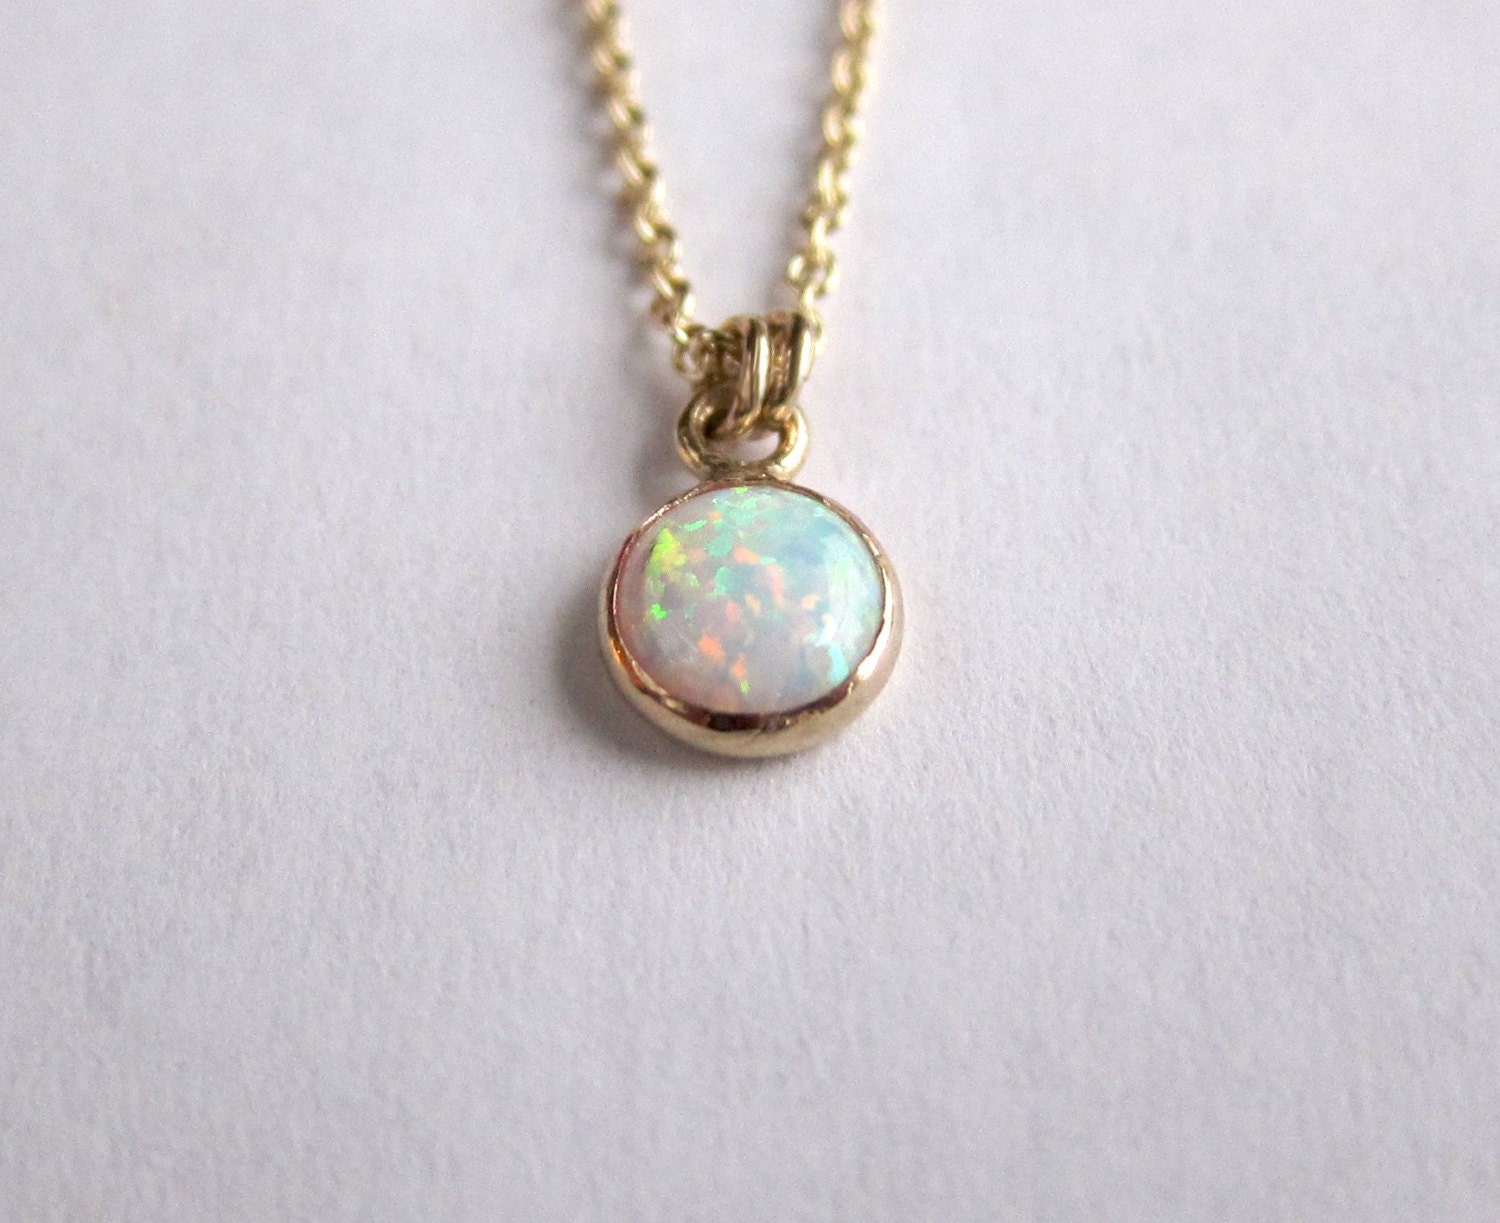 Tiny Opal Necklace Gold Or Silver With 6 Or 8 Mm Lab Opal Etsy